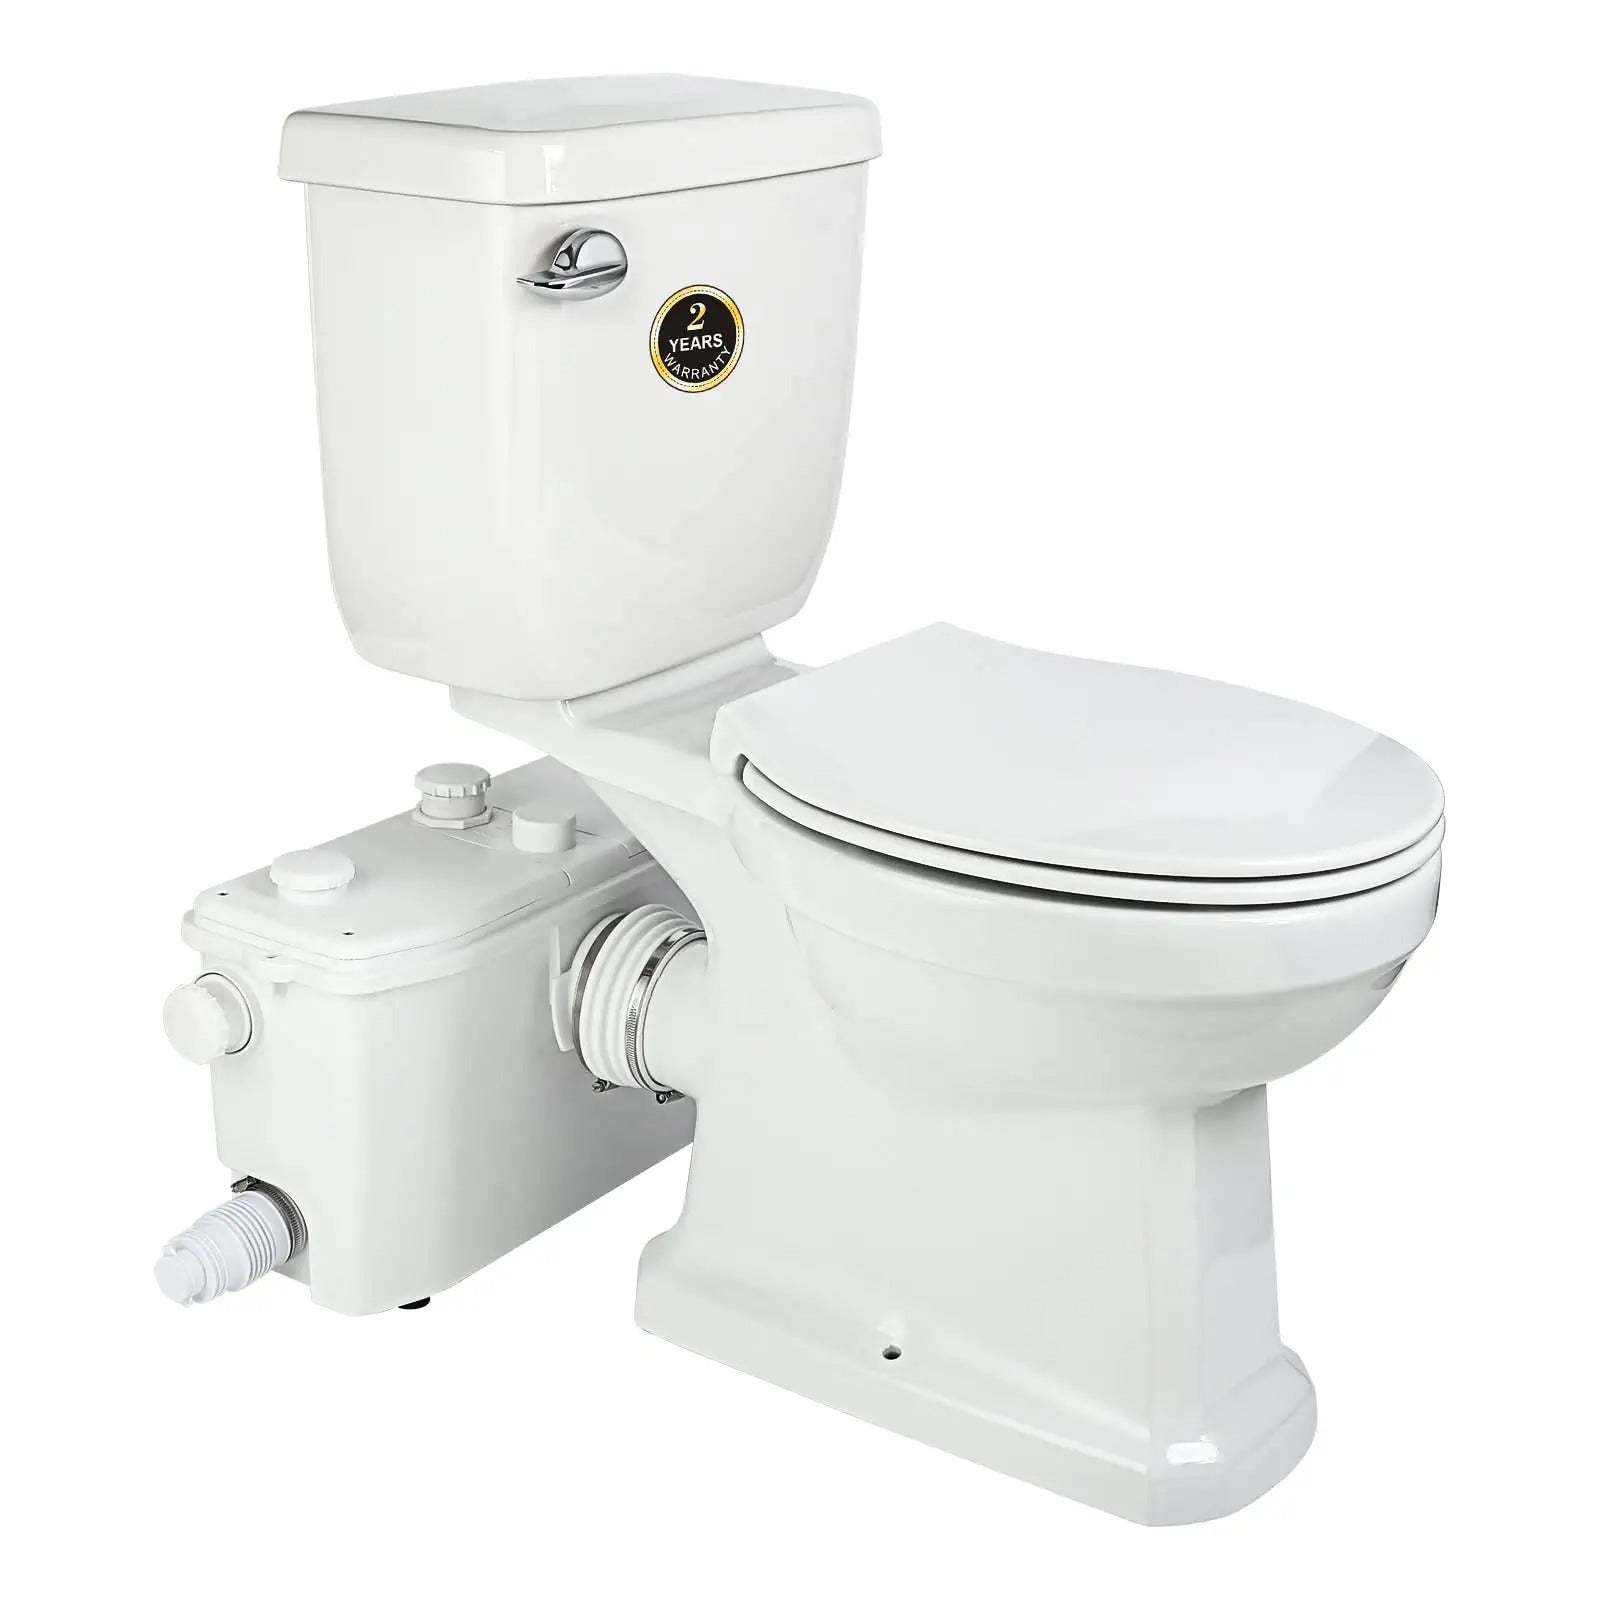 Macerating Toilet with 700 Watt Macerator Pump, Extension Pipe and